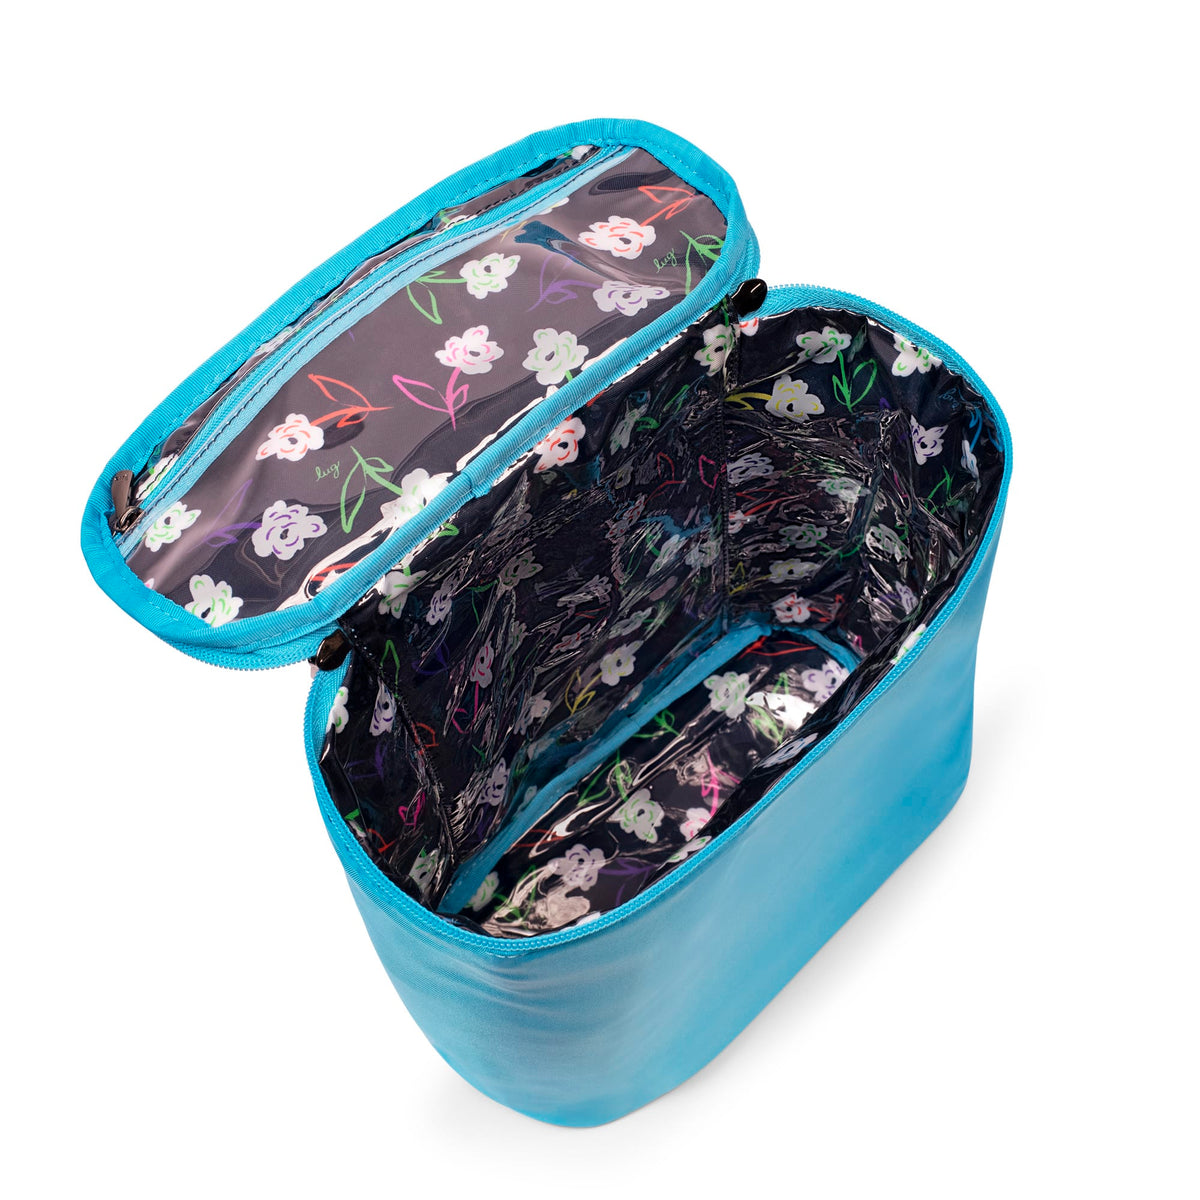 Dolly Tall Cosmetic Case